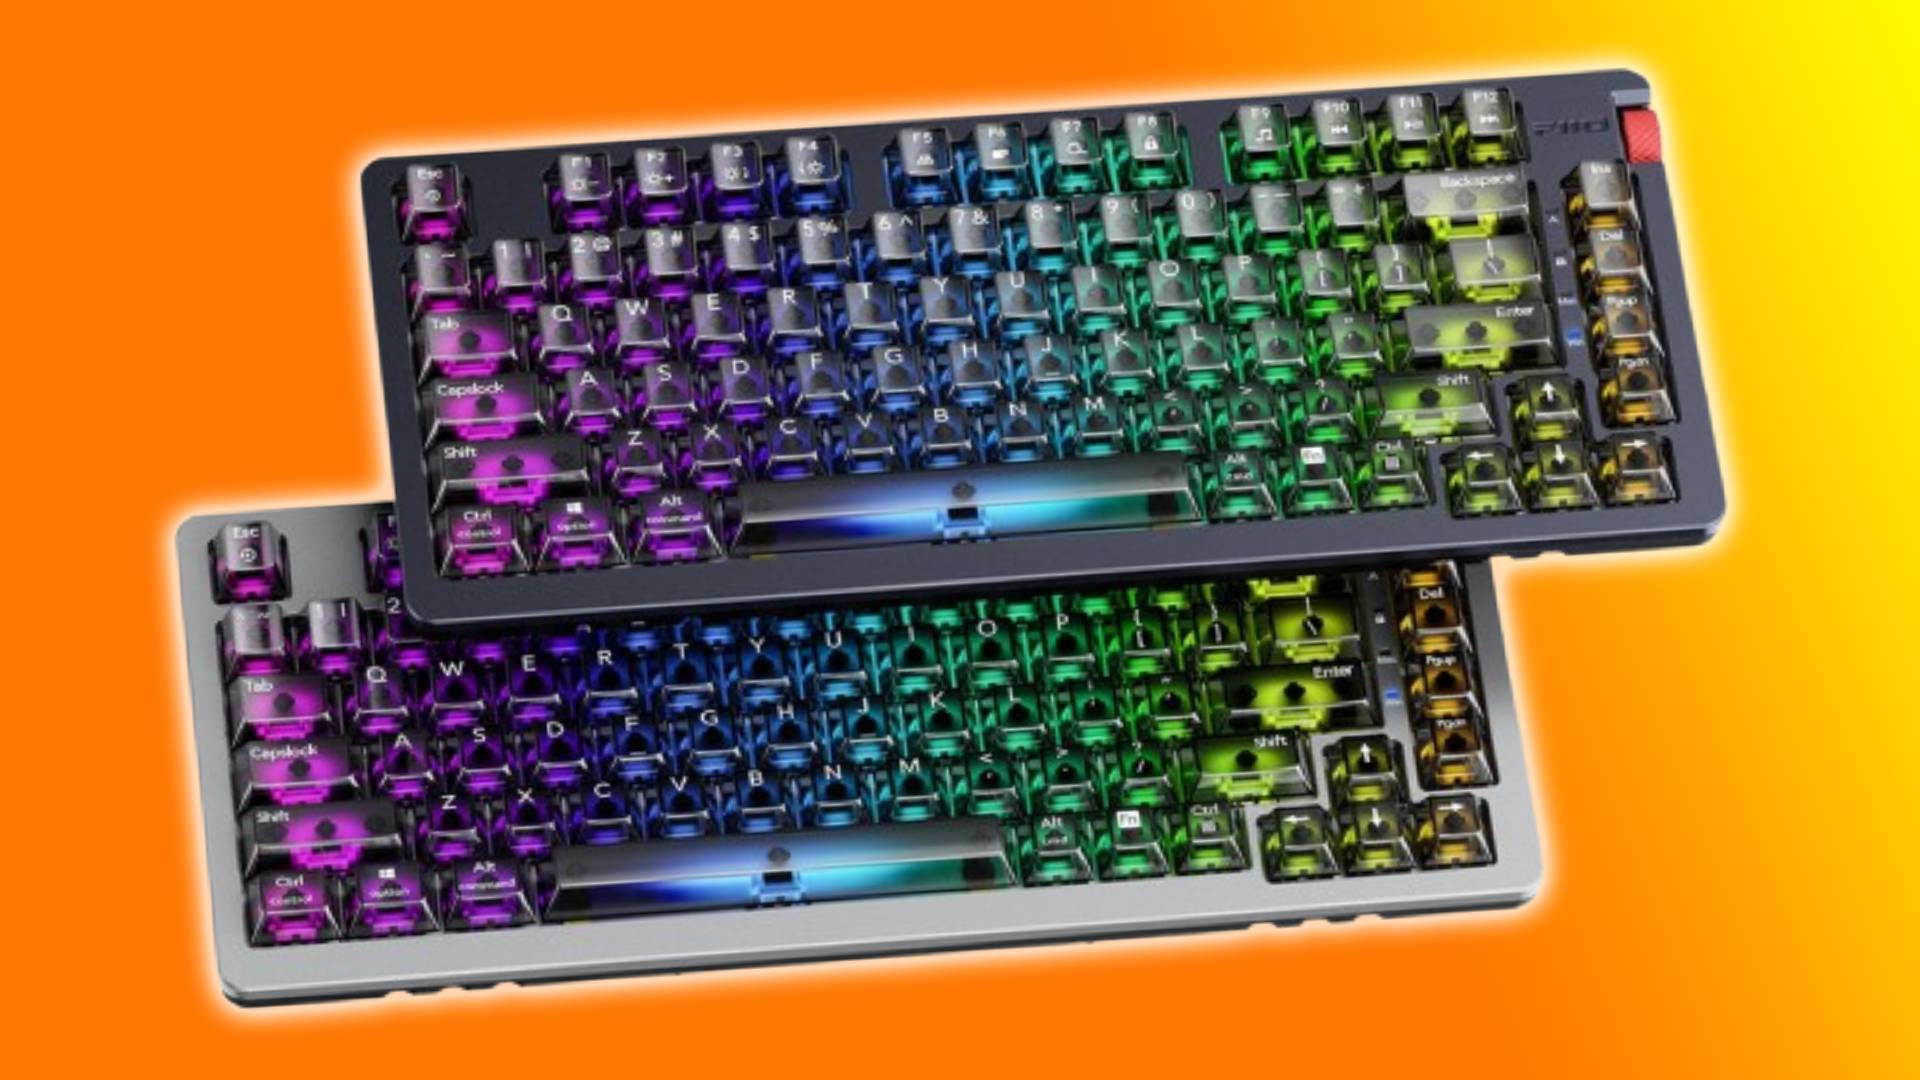 Audio mechanical keyboards are a thing, no really